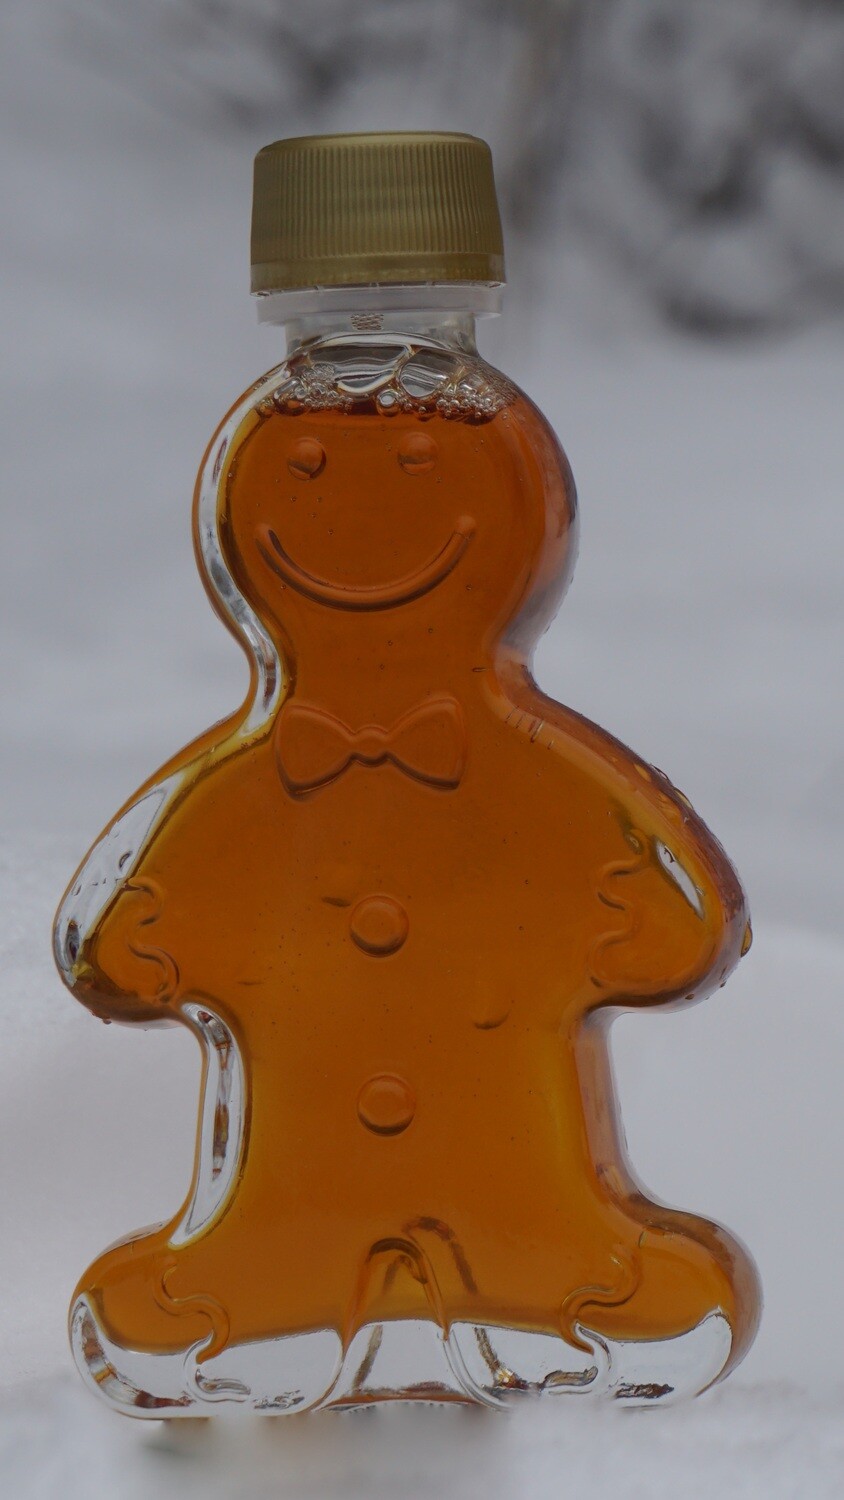 Jed's Maple > Product > Maple Syrup in Gingerbread Man Bottle